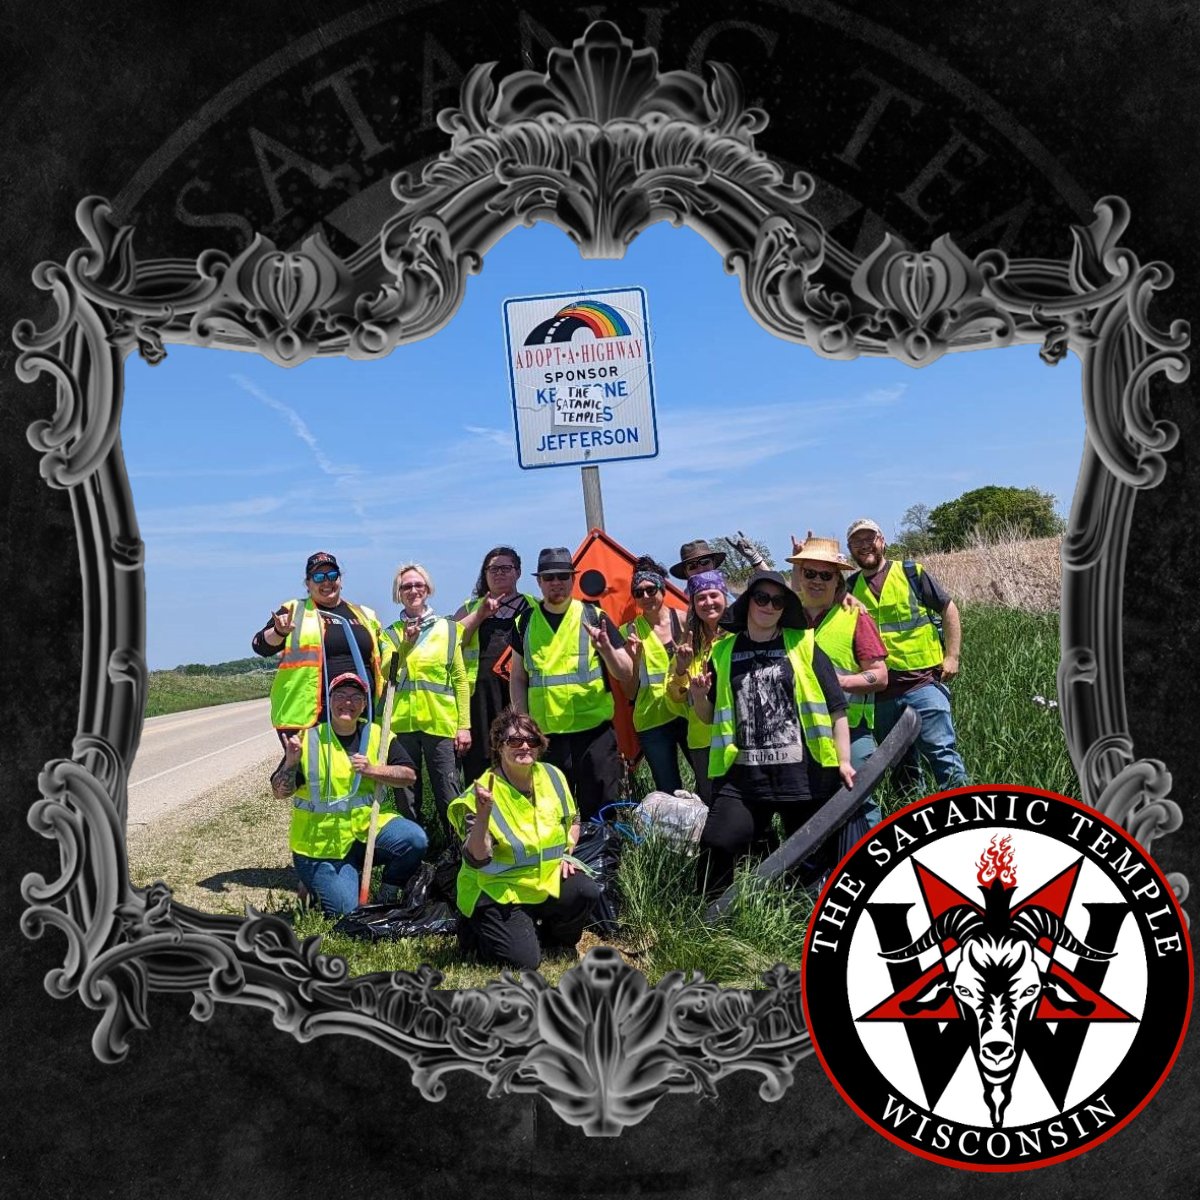 On May 21st, TST Wisconsin's congregation dedicated their time and energy to help clean up Hwy 18. With a longstanding tradition of community service, TST congregations strive to make a positive impact in their neighborhoods. To find a local congregation: tst.link/congregation